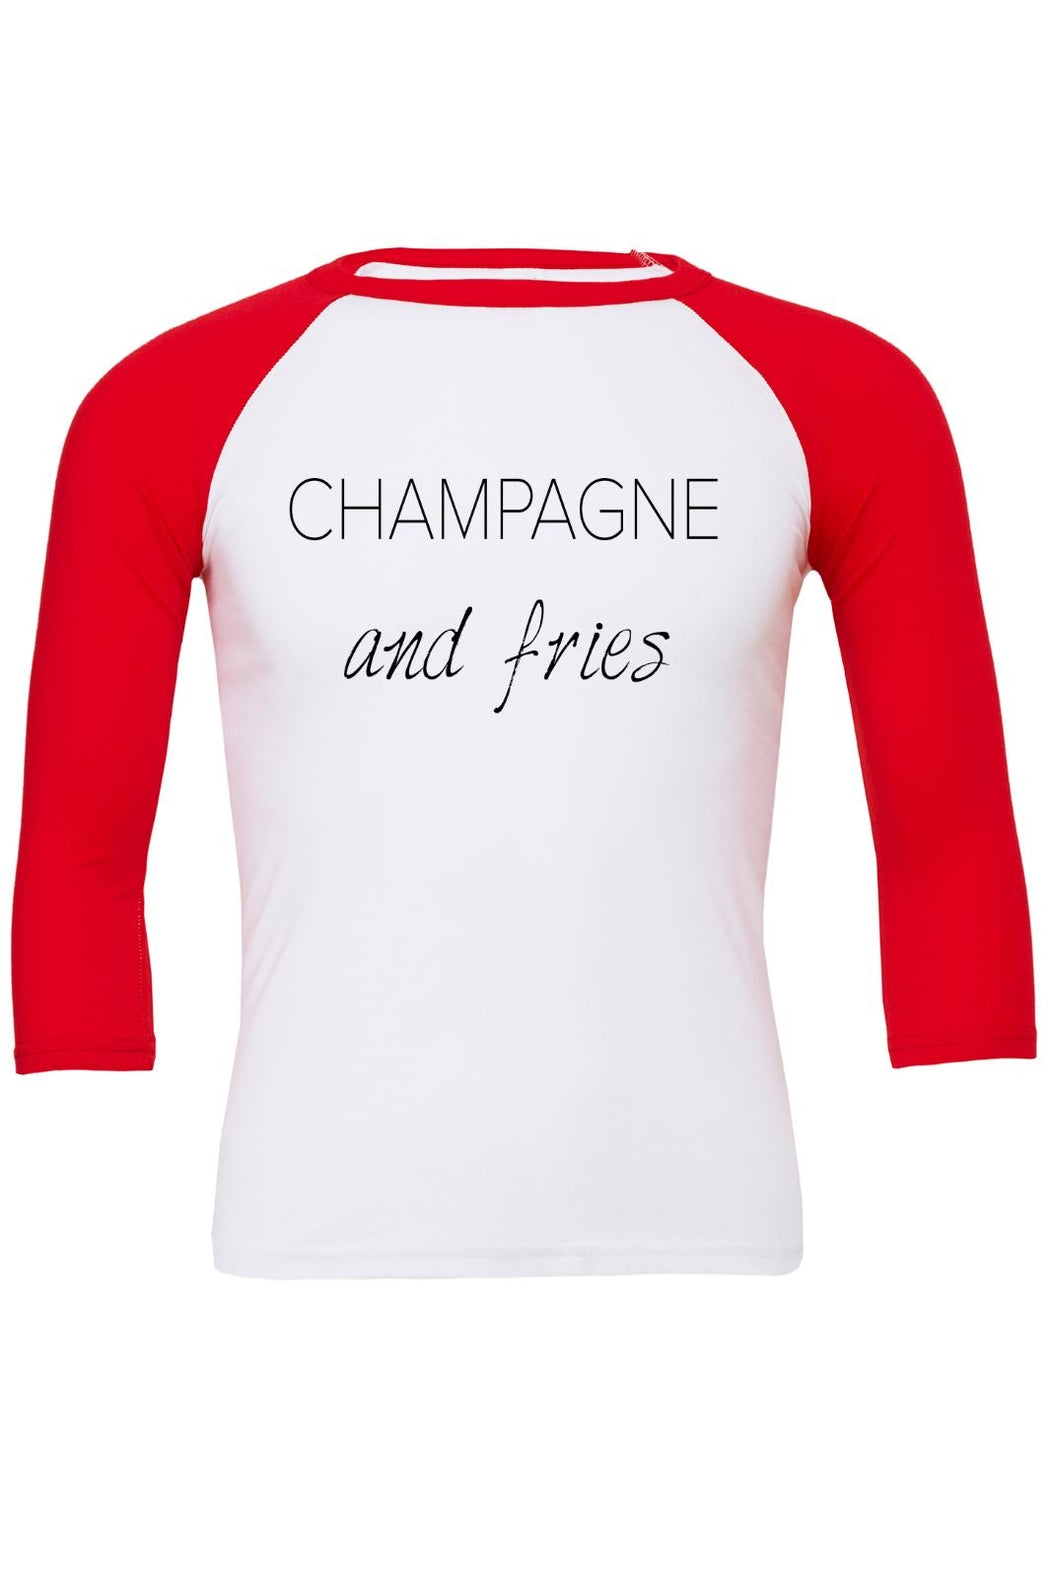 Champagne and Fries Tee - Adult